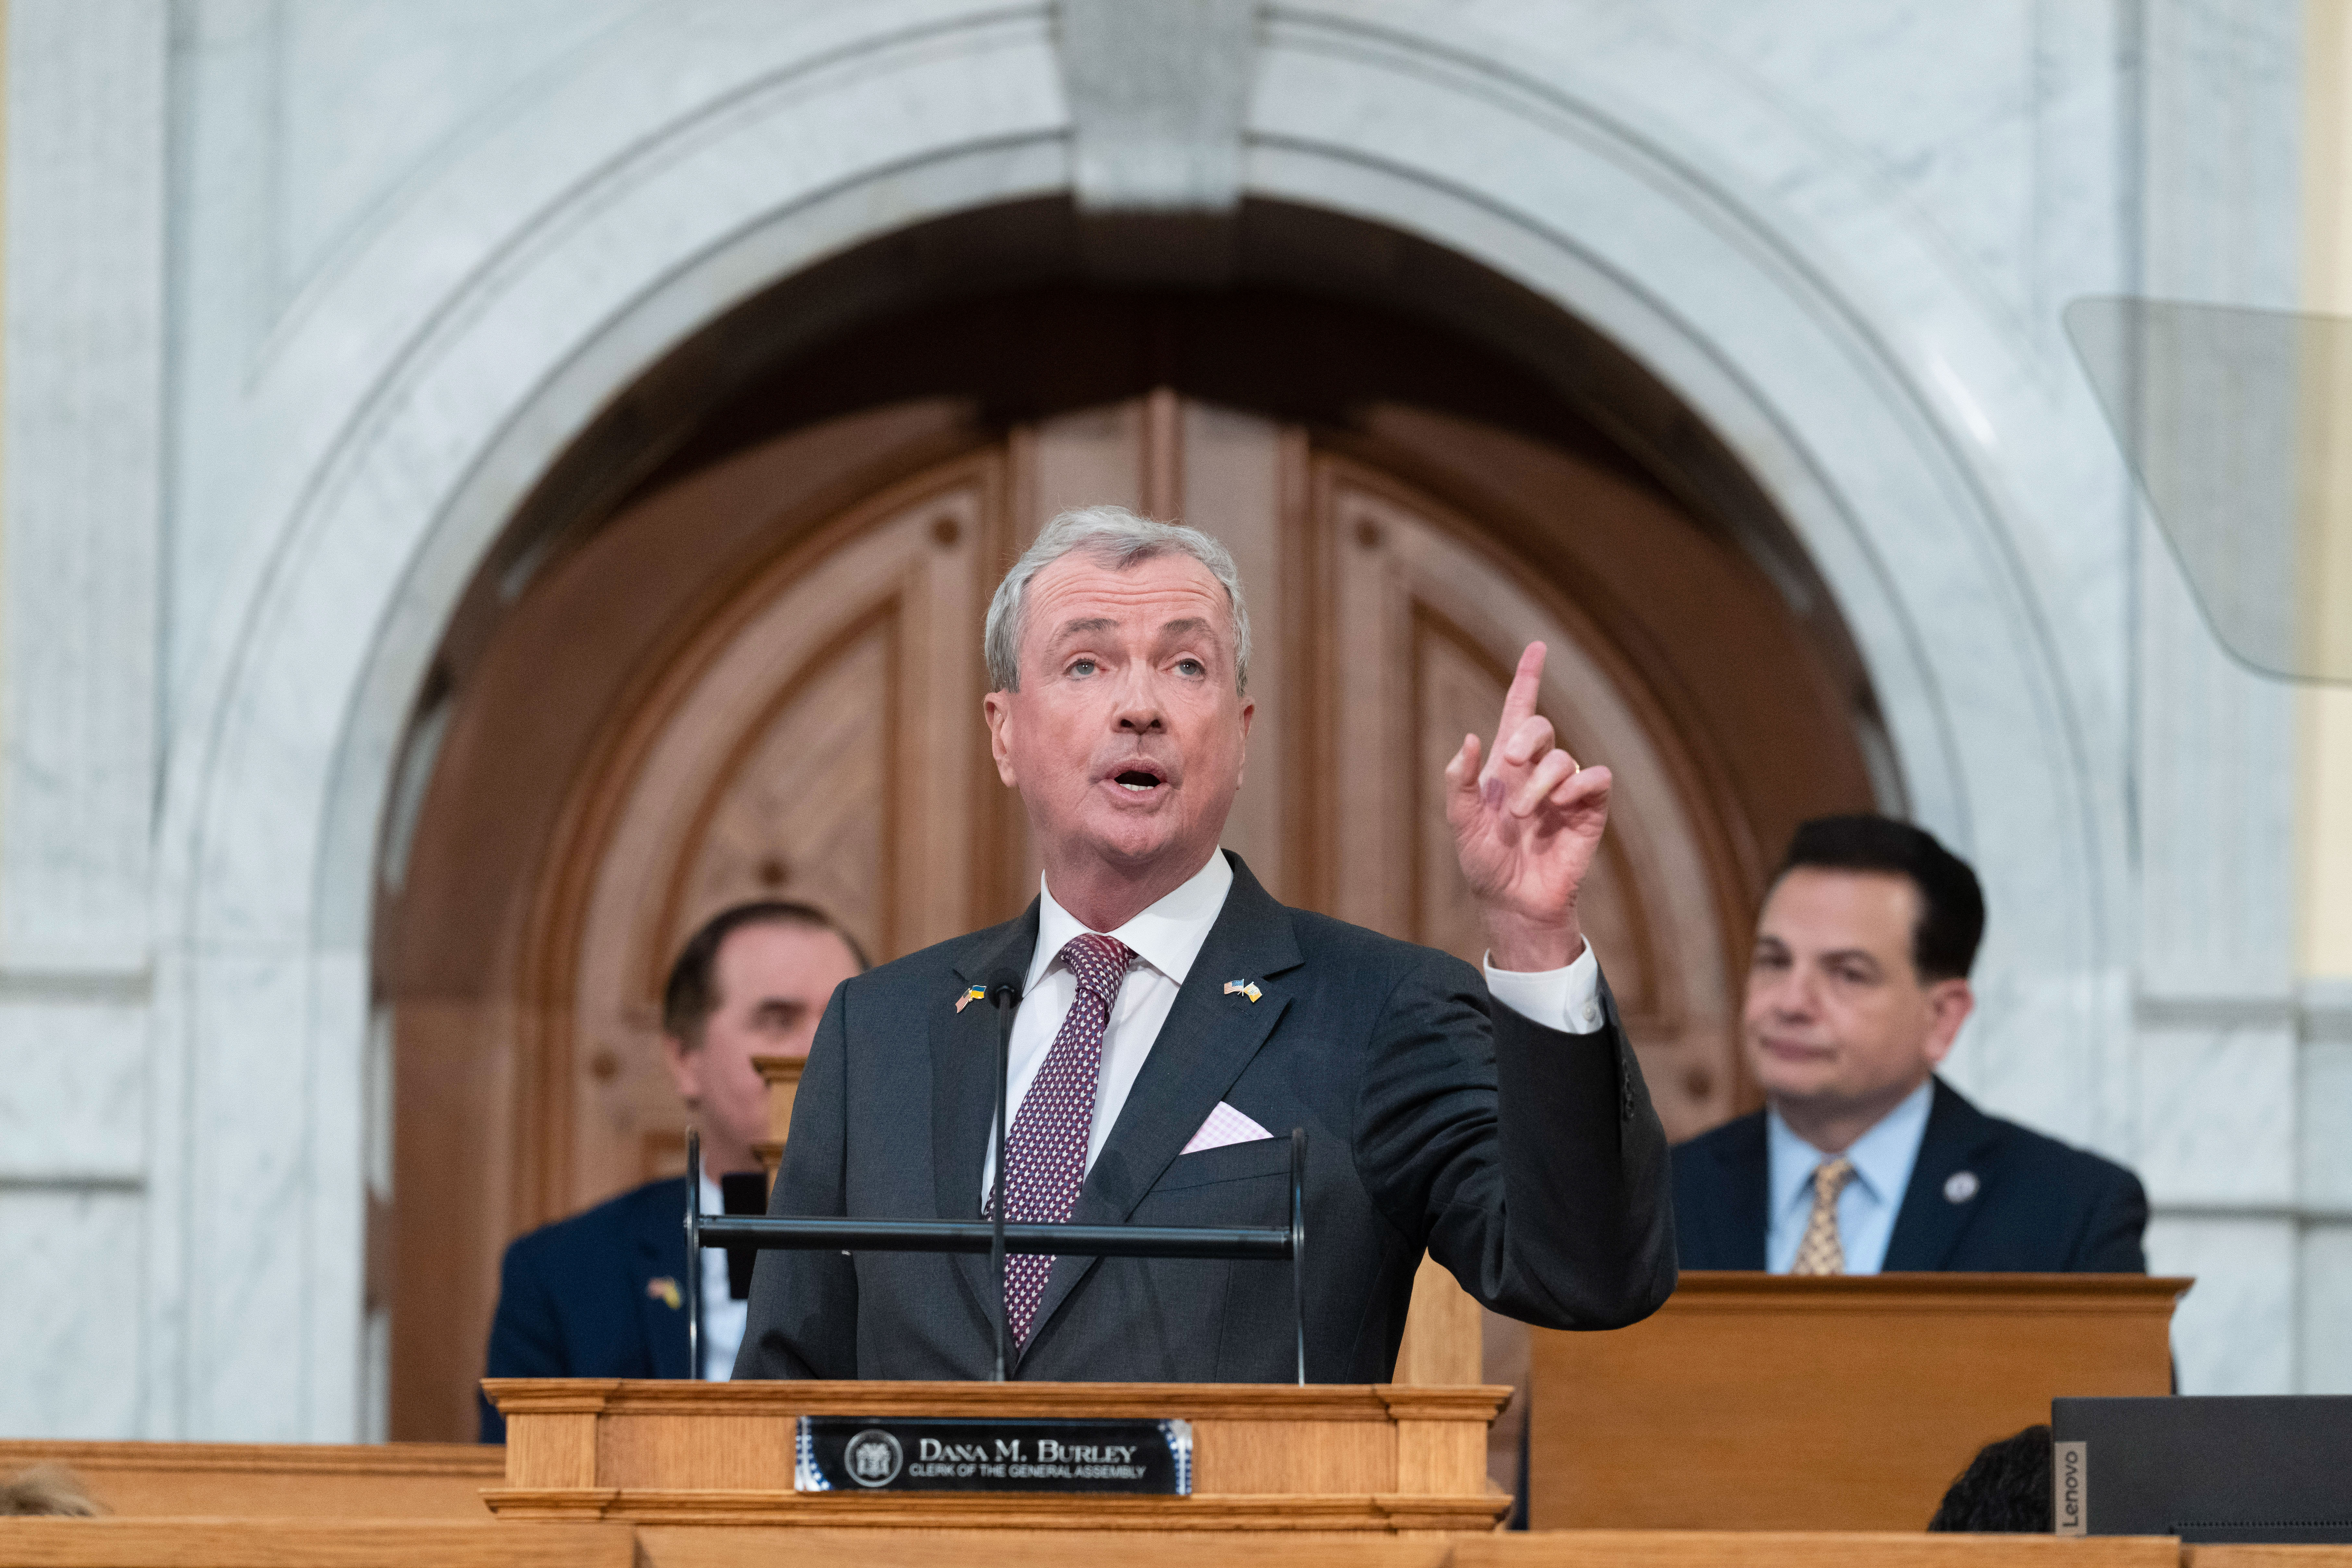 New Jersey Gov. Phil Murphy delivers his State of the State address to a joint session of the Legislature at the statehouse in Trenton, N.J. on Jan. 10, 2023.